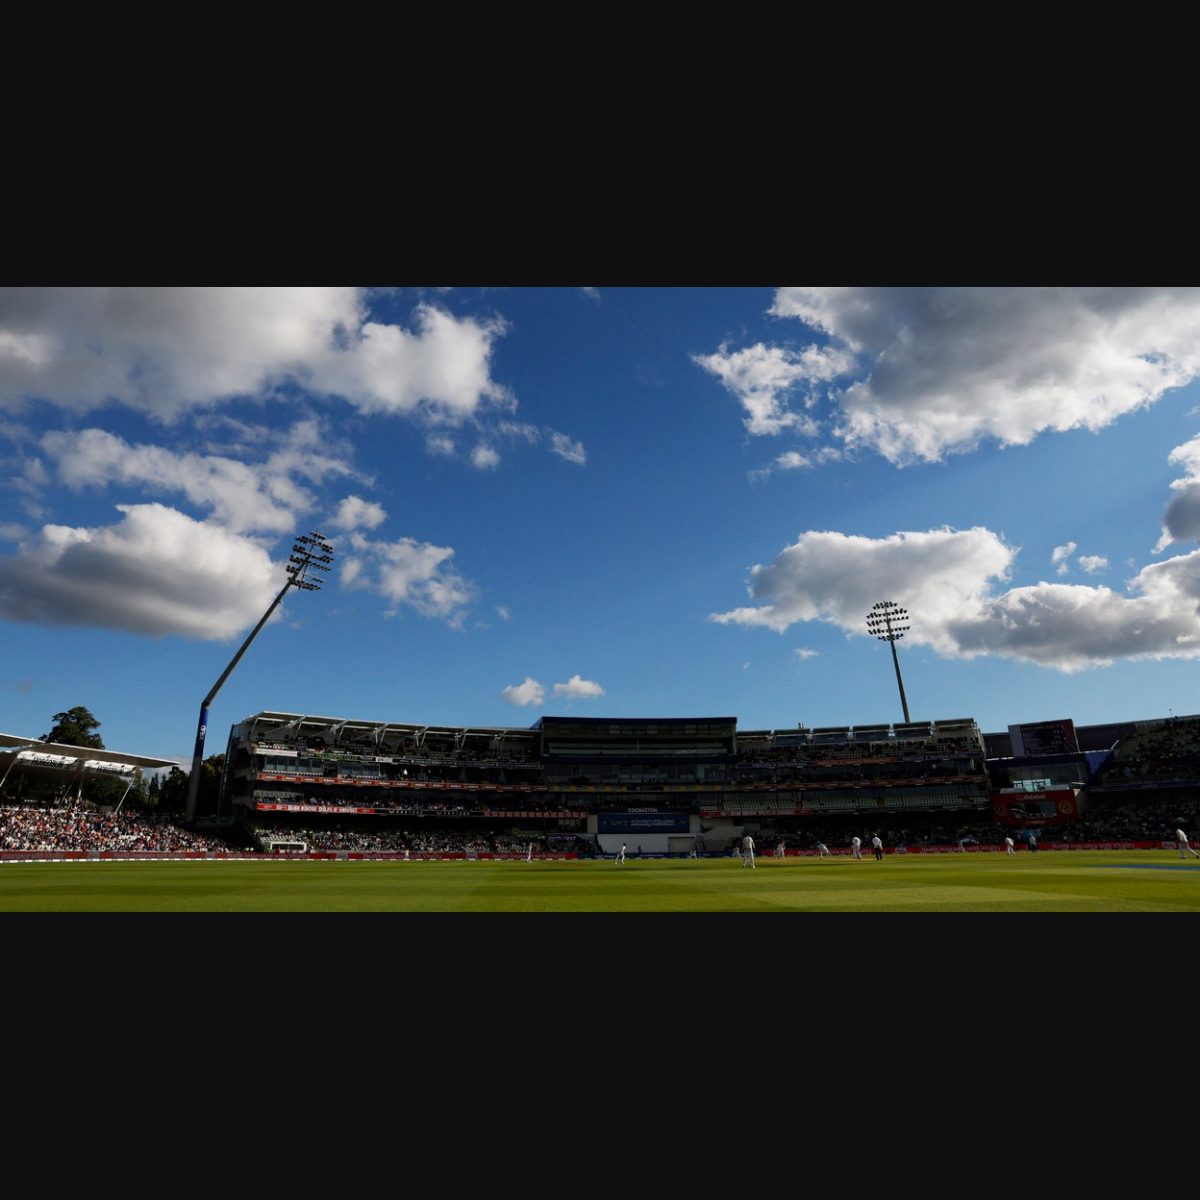 Police arrest fan after racism allegations at Edgbaston Test | Cricket News  | Onmanorama